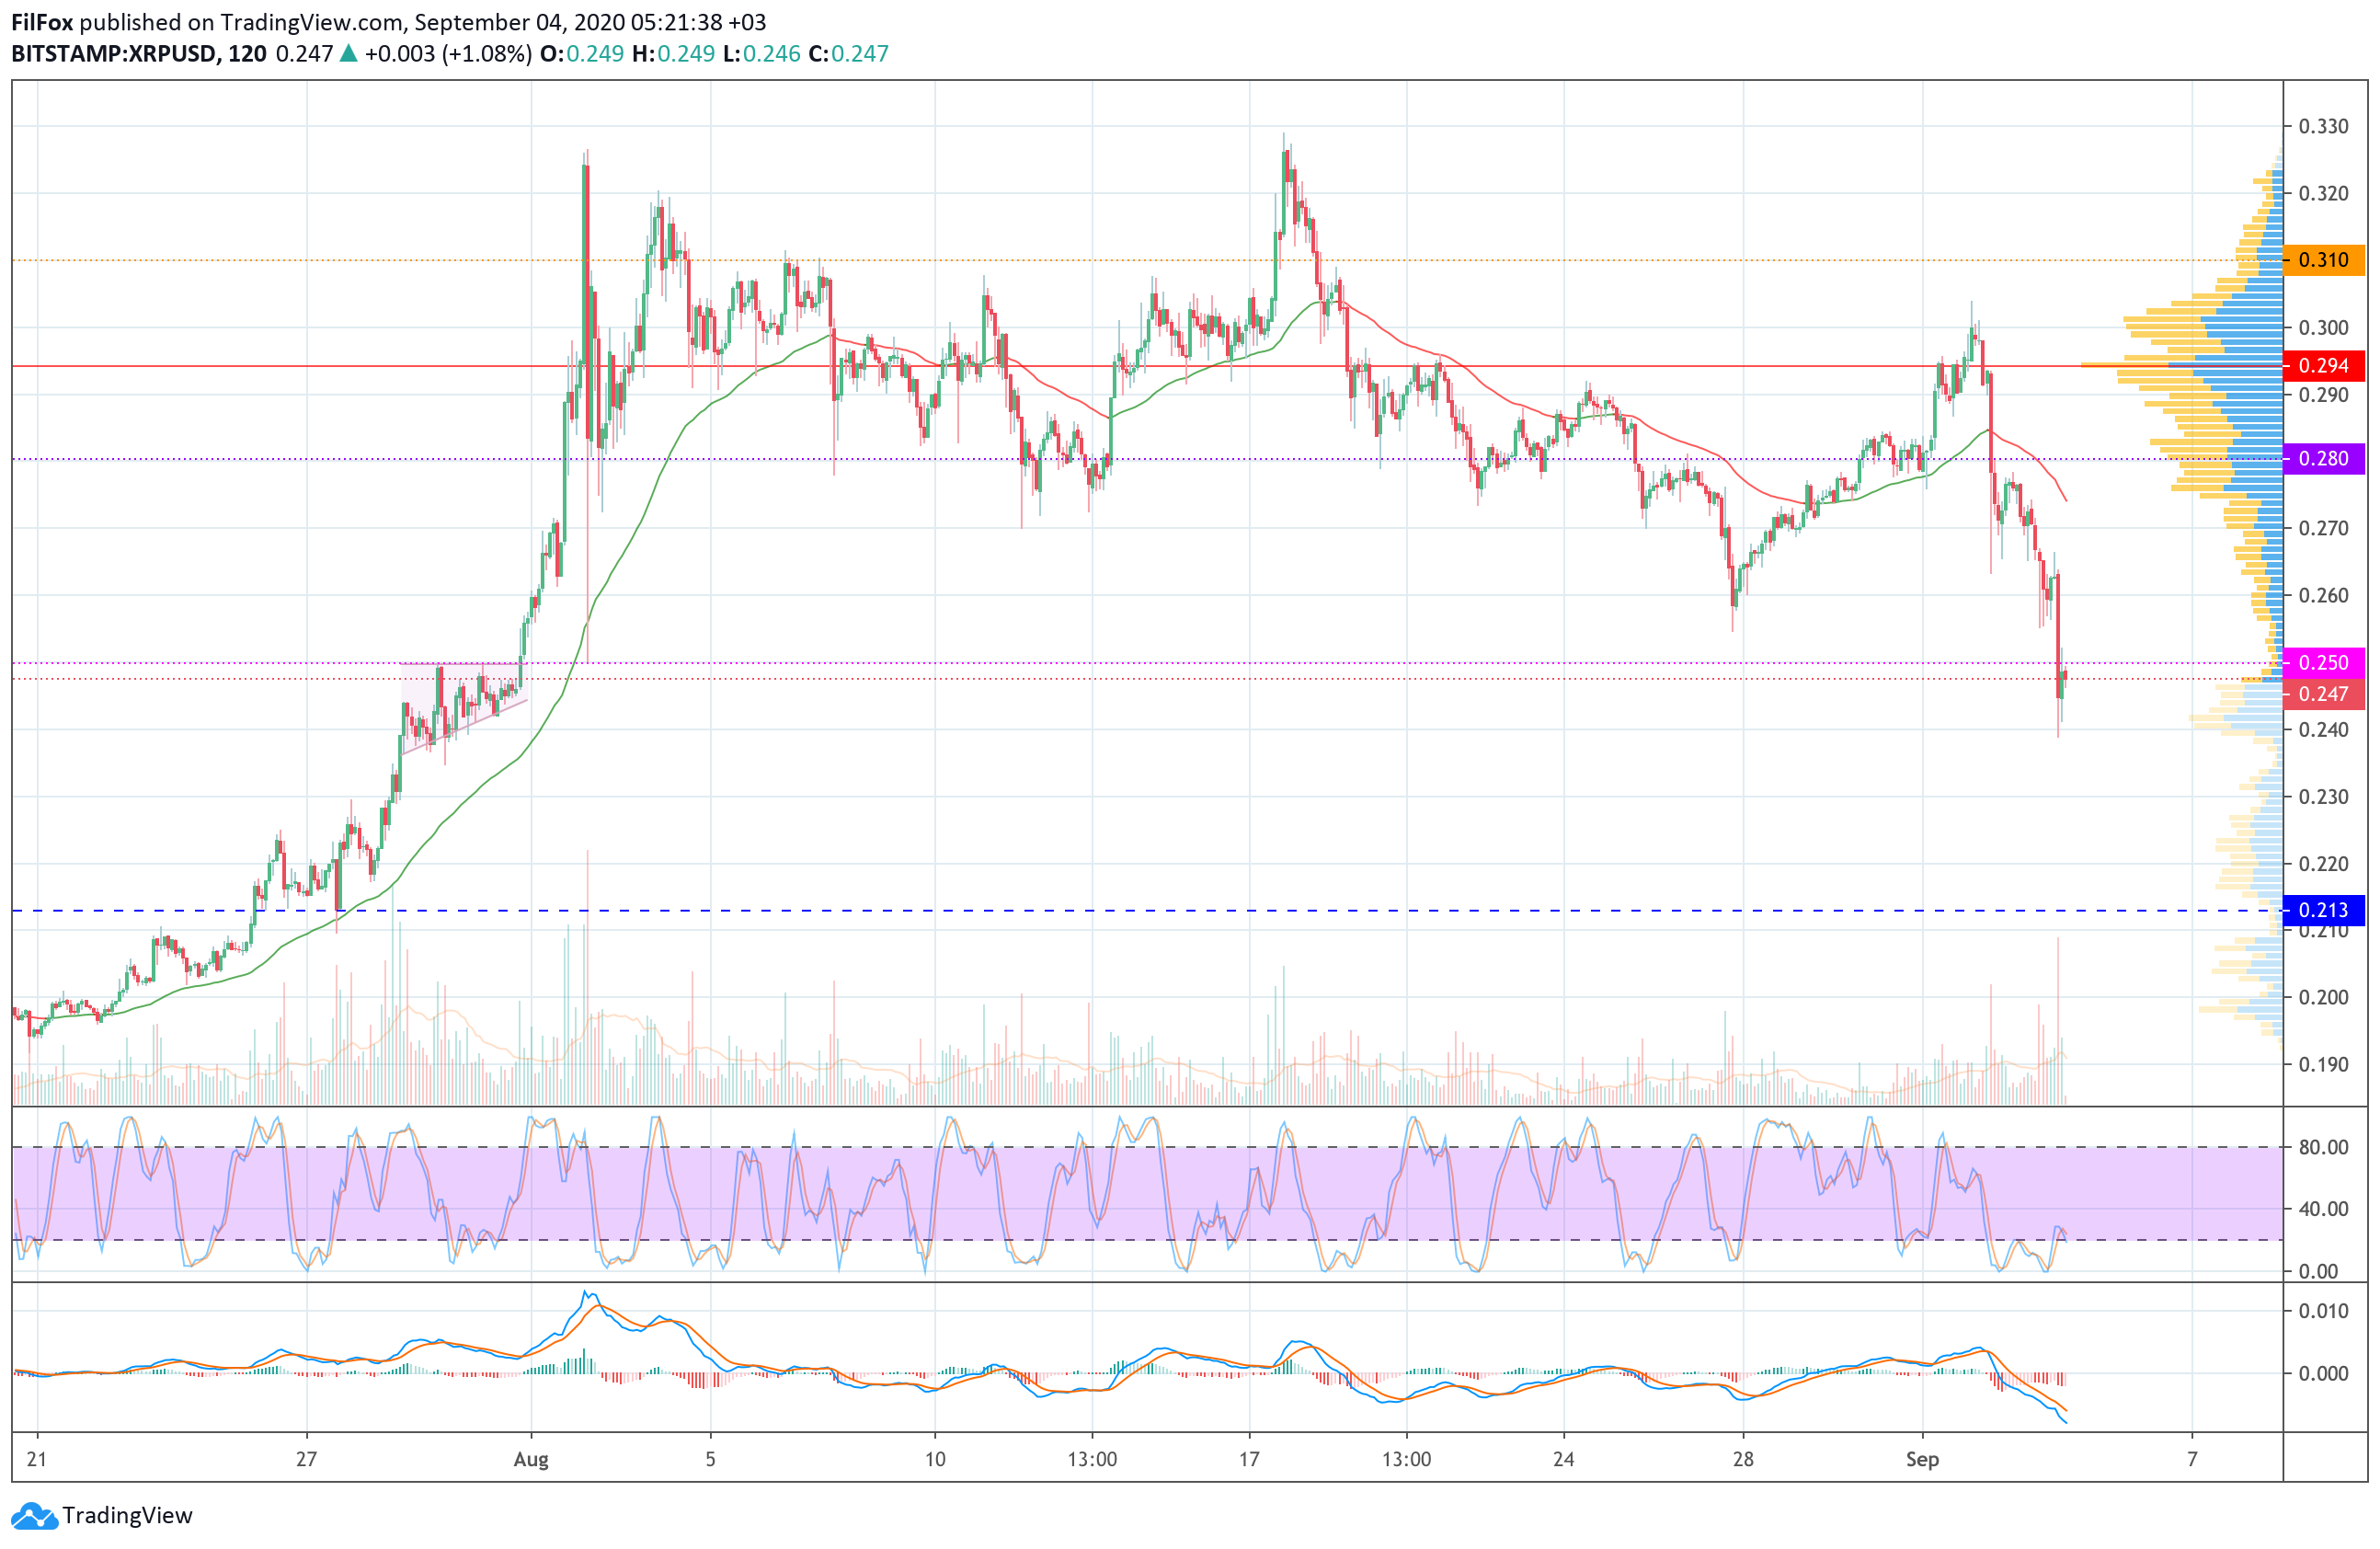 Analysis of prices for Bitcoin, Ethereum, XRP for 09/04/2020